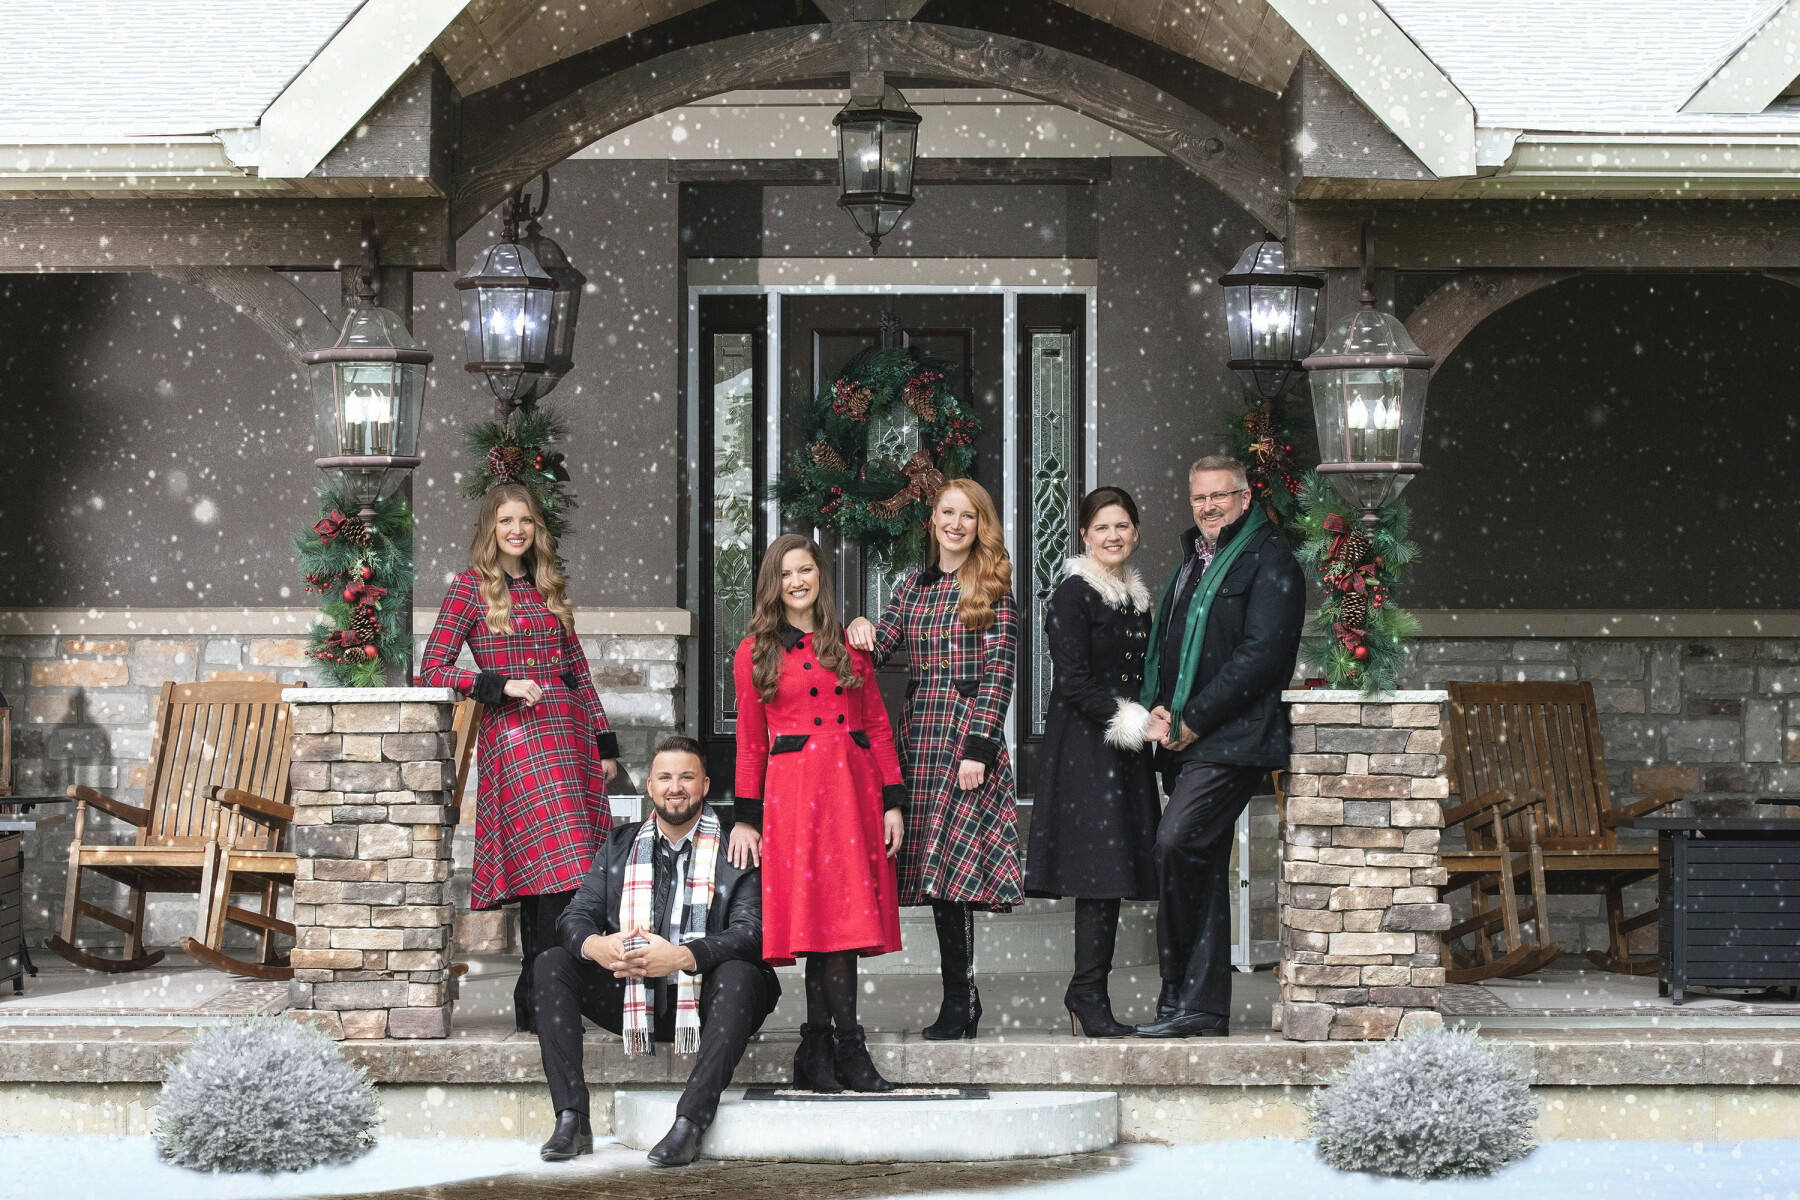 VPC Concert Series: Collingsworth Family Singers